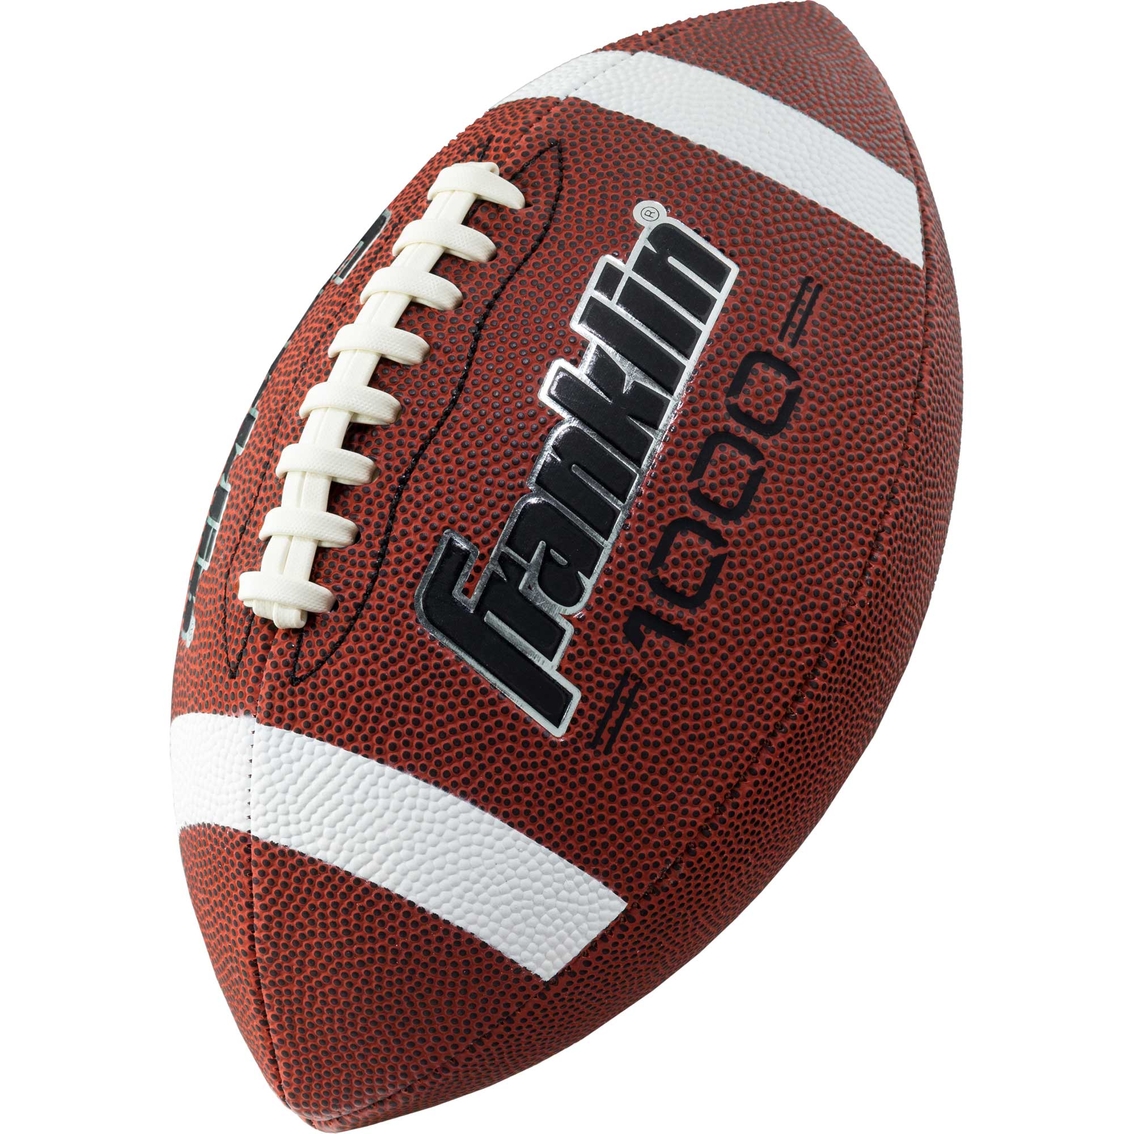 Franklin 1000 Series Grip Rite PVC Football Official Size